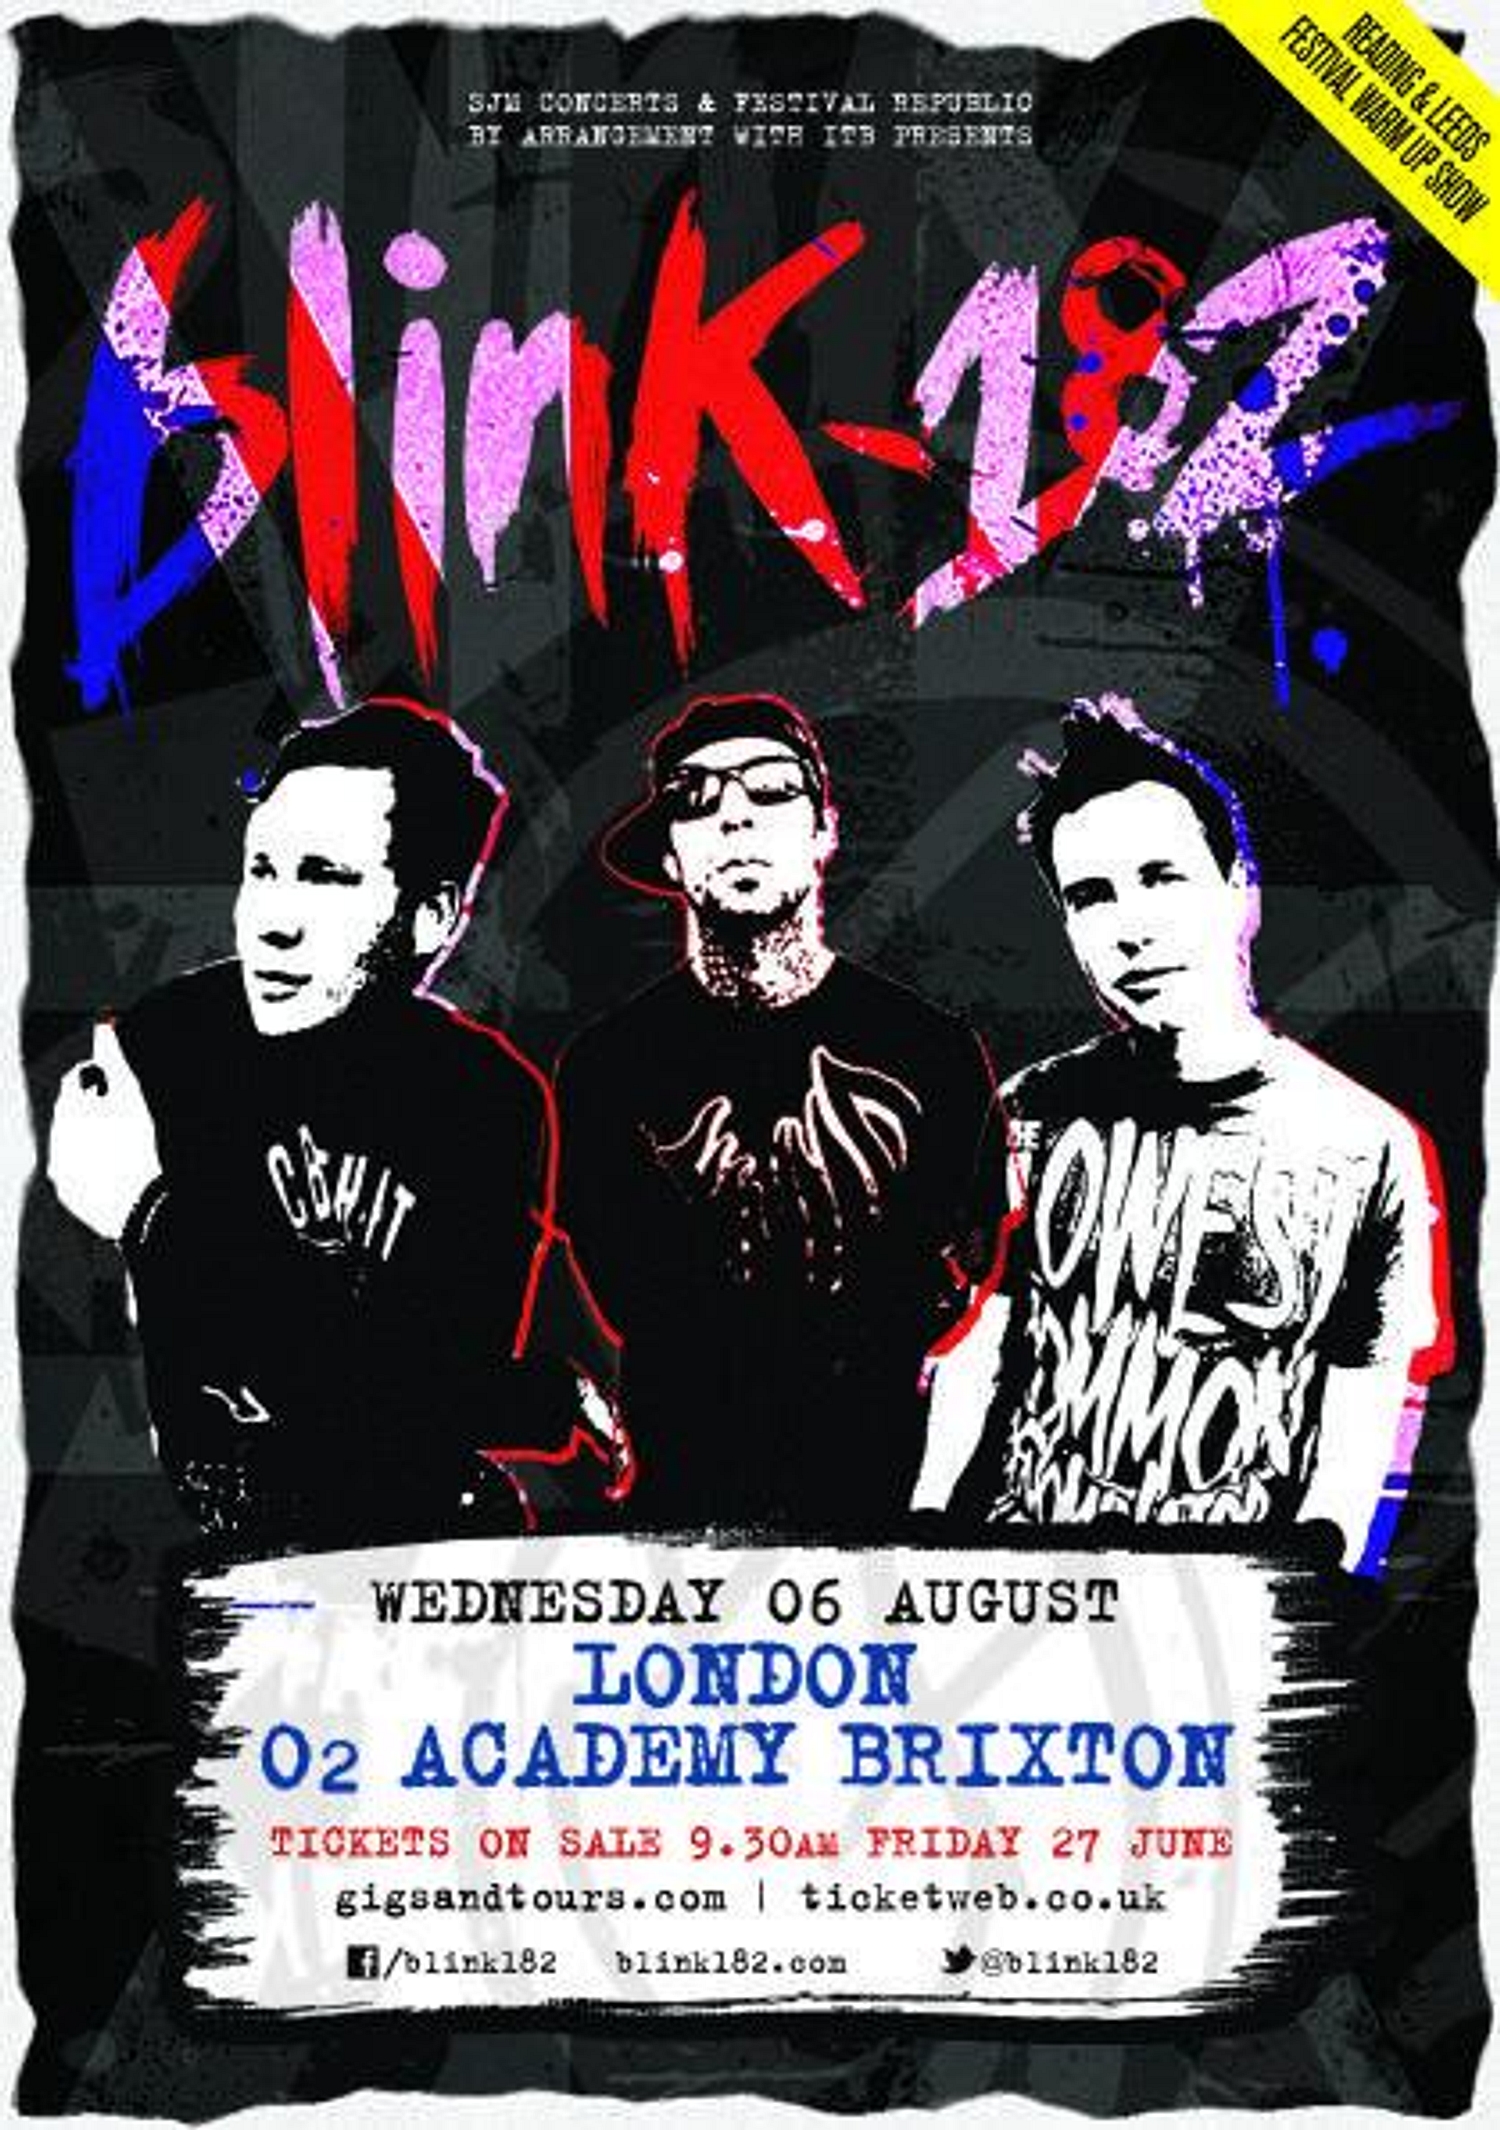 Blink-182 announce one-off London date